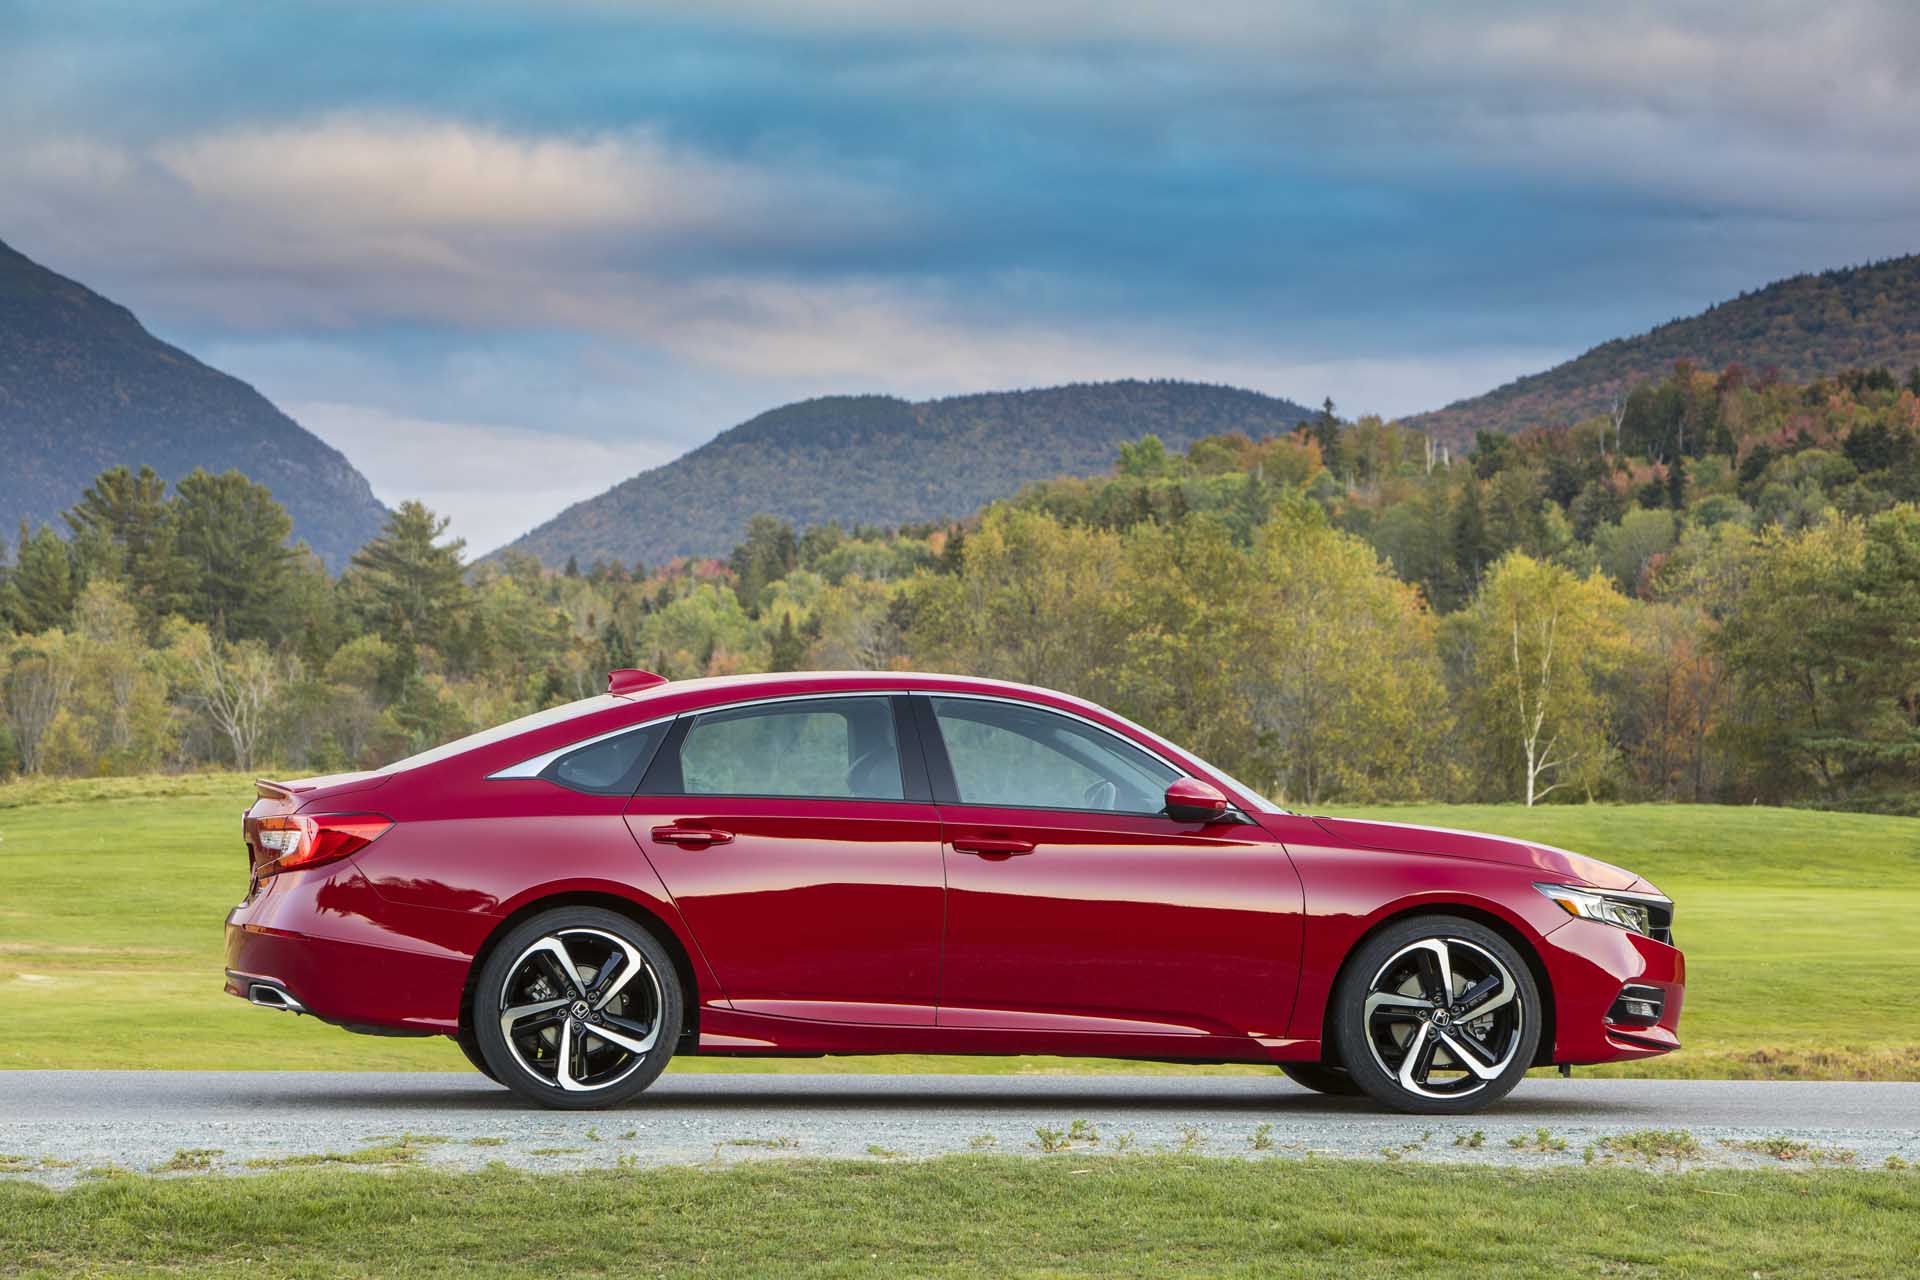 2020 Honda Accord Review, Ratings, Specs, Prices, and Photos - The Car